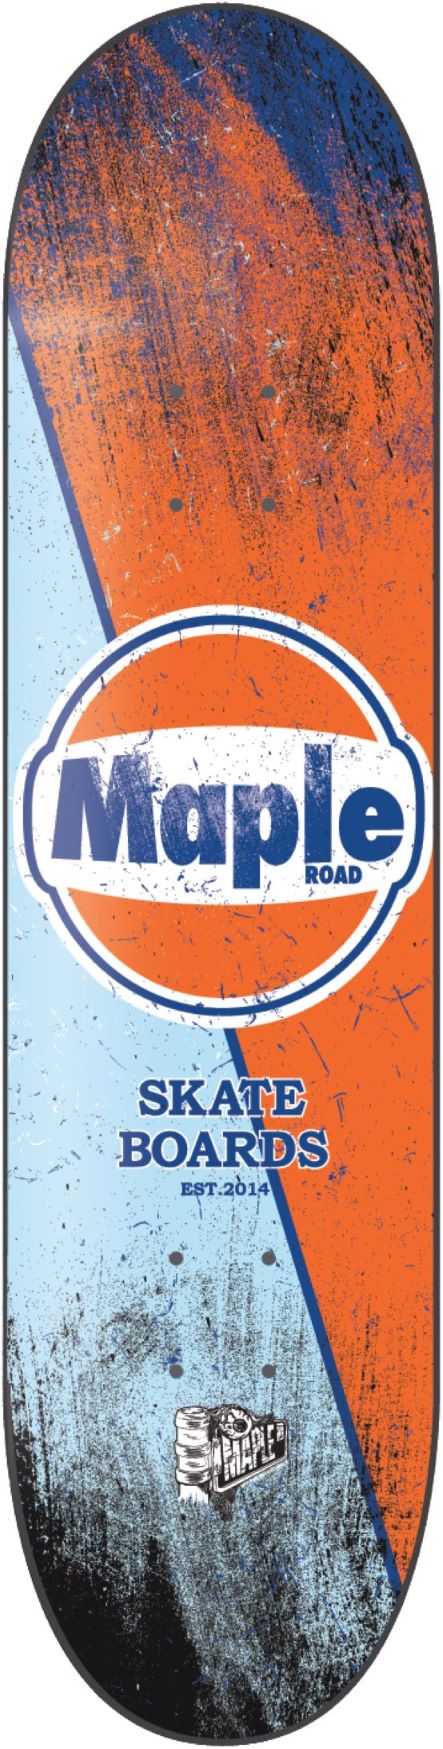 MAPLE ROAD LIMITED EDITION VINTAGE GULF COLLECTORS DECK